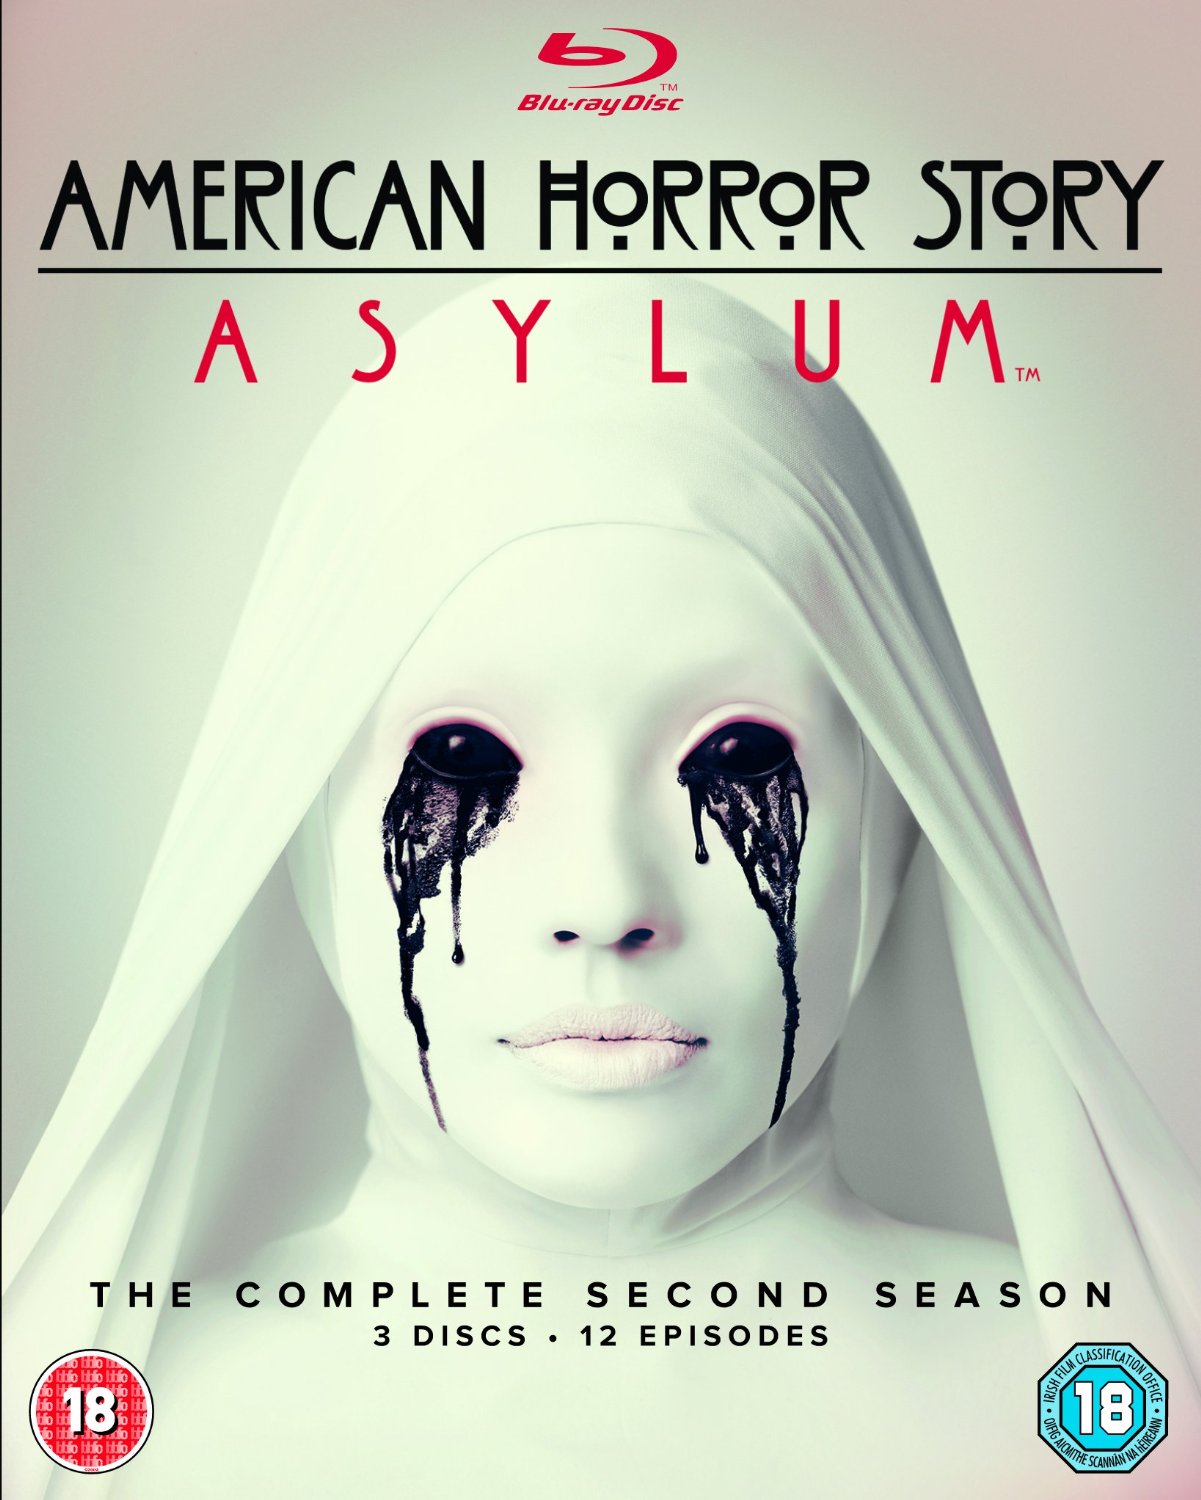 boom competitions - win a copy of American Horror Story: Asylum on Blu-ray